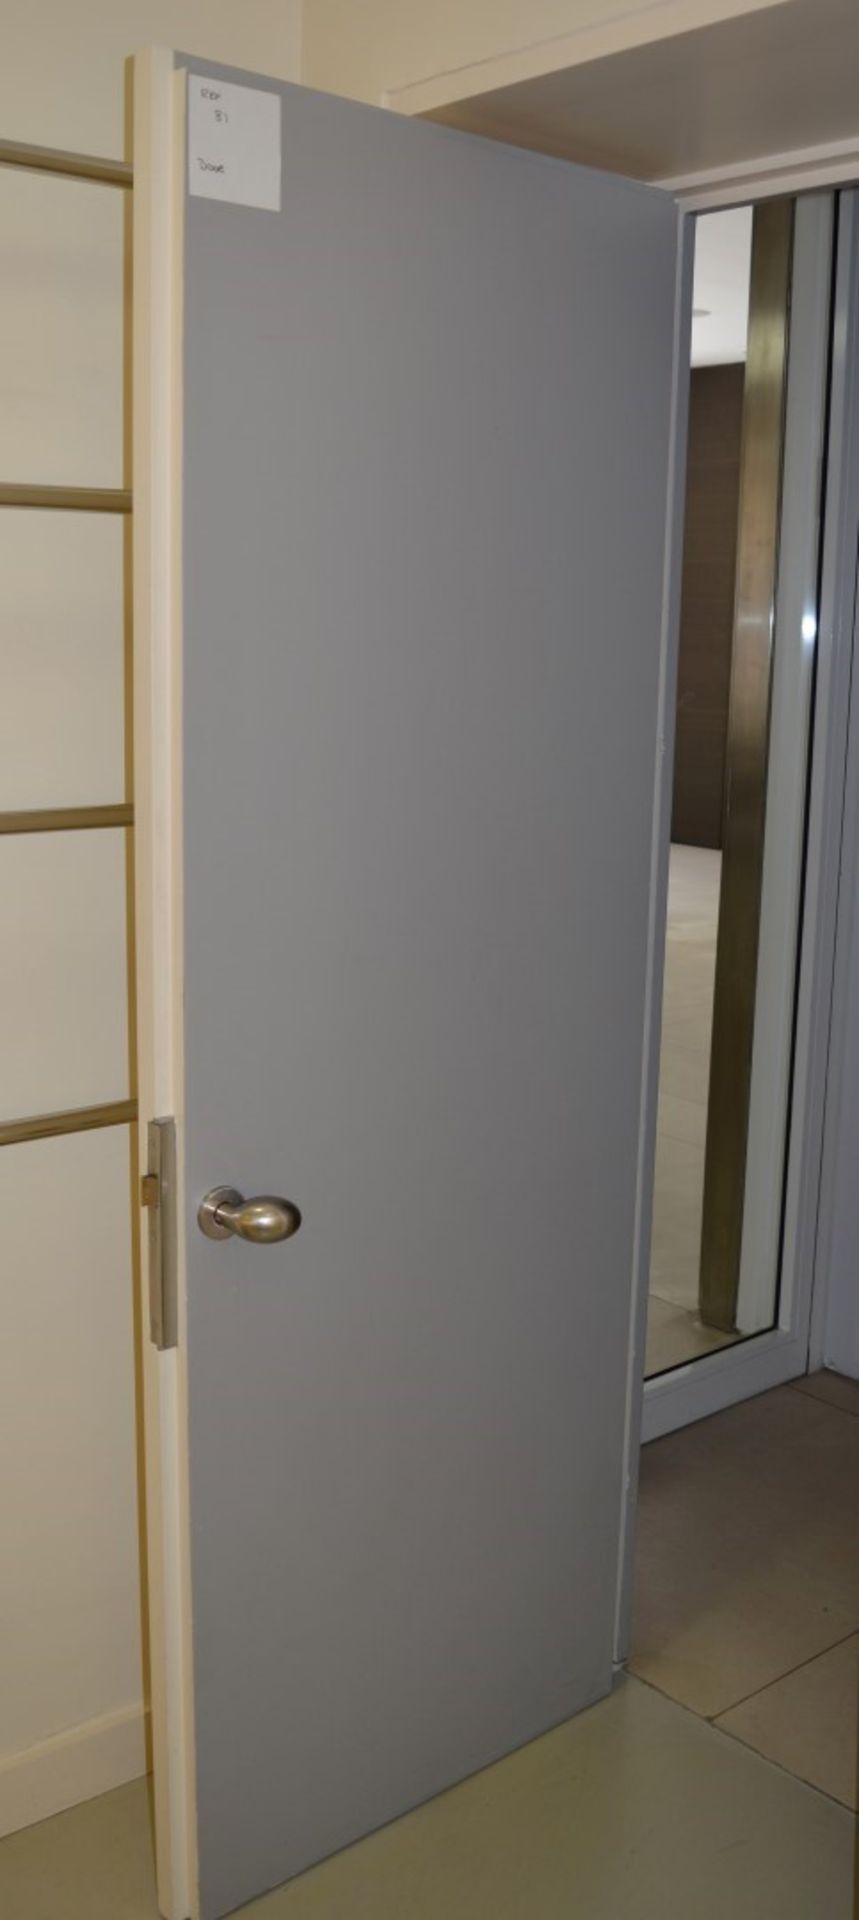 1 x Fire Resistant Internal Door - Fitted With Stylish Chrome Door Knobs and Triple Hinges - H194.